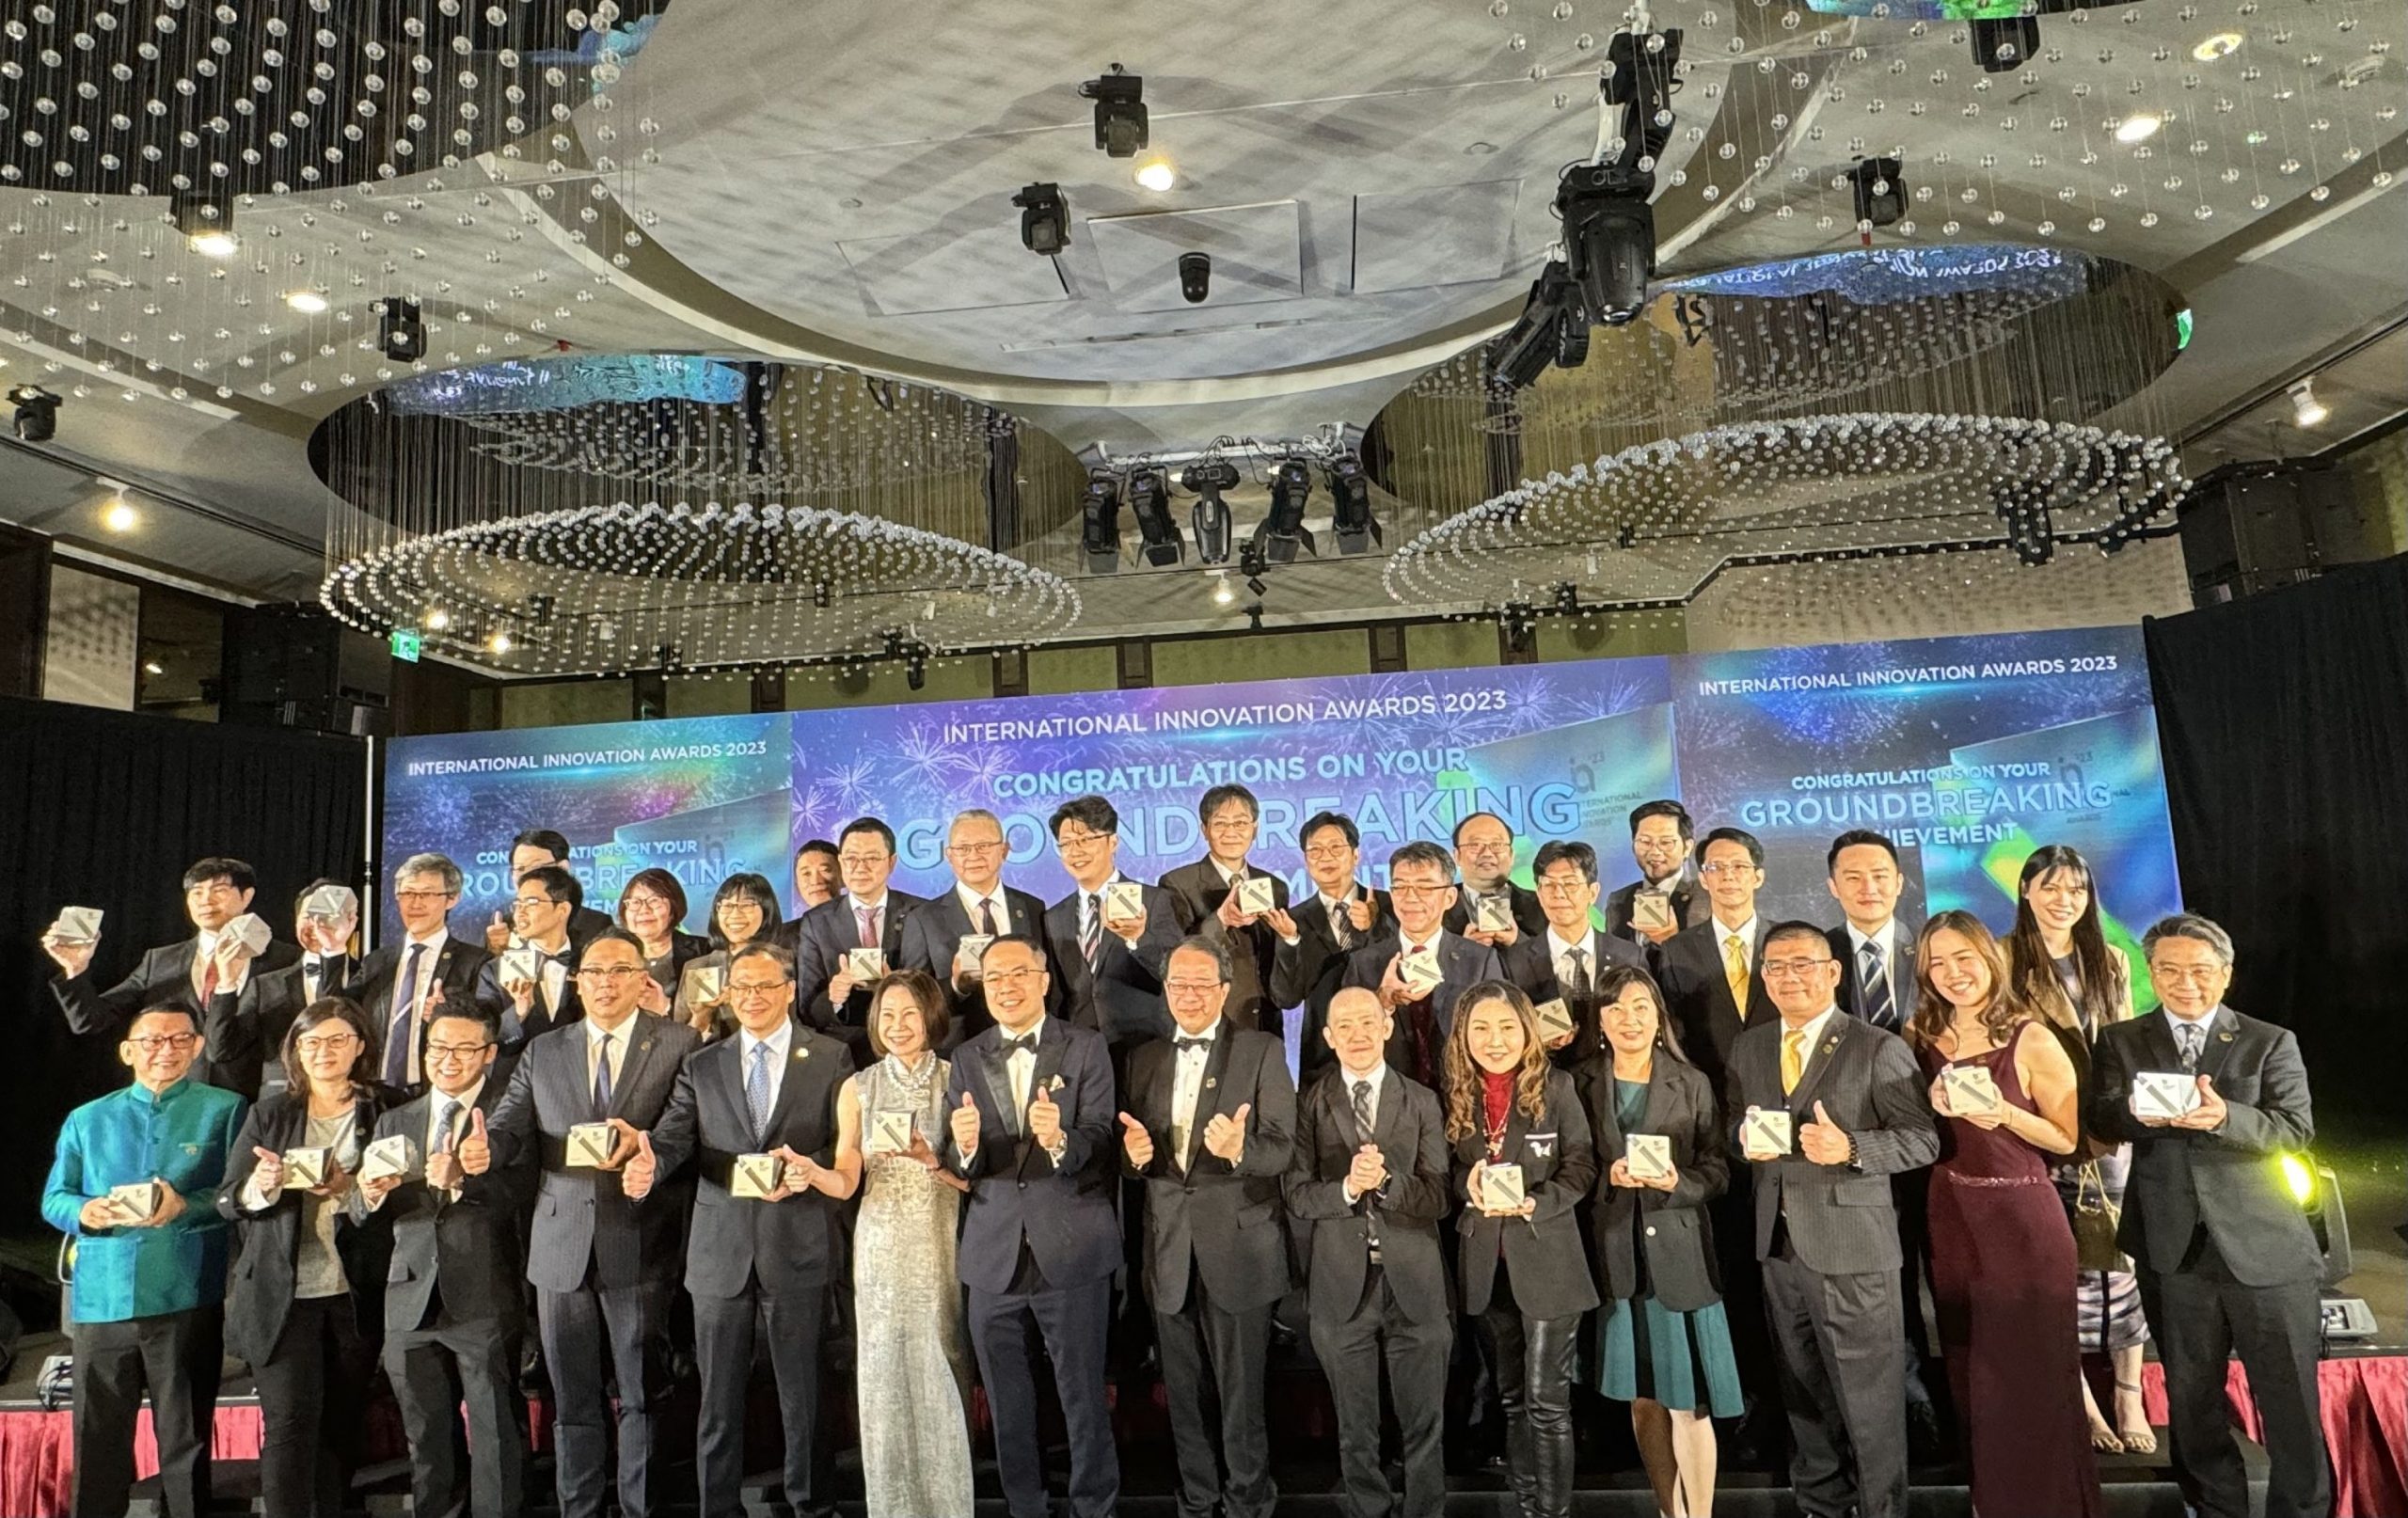 The result of this international award once again symbolizes New Taipei's elevated achievements in advancing a smart and sustainable city